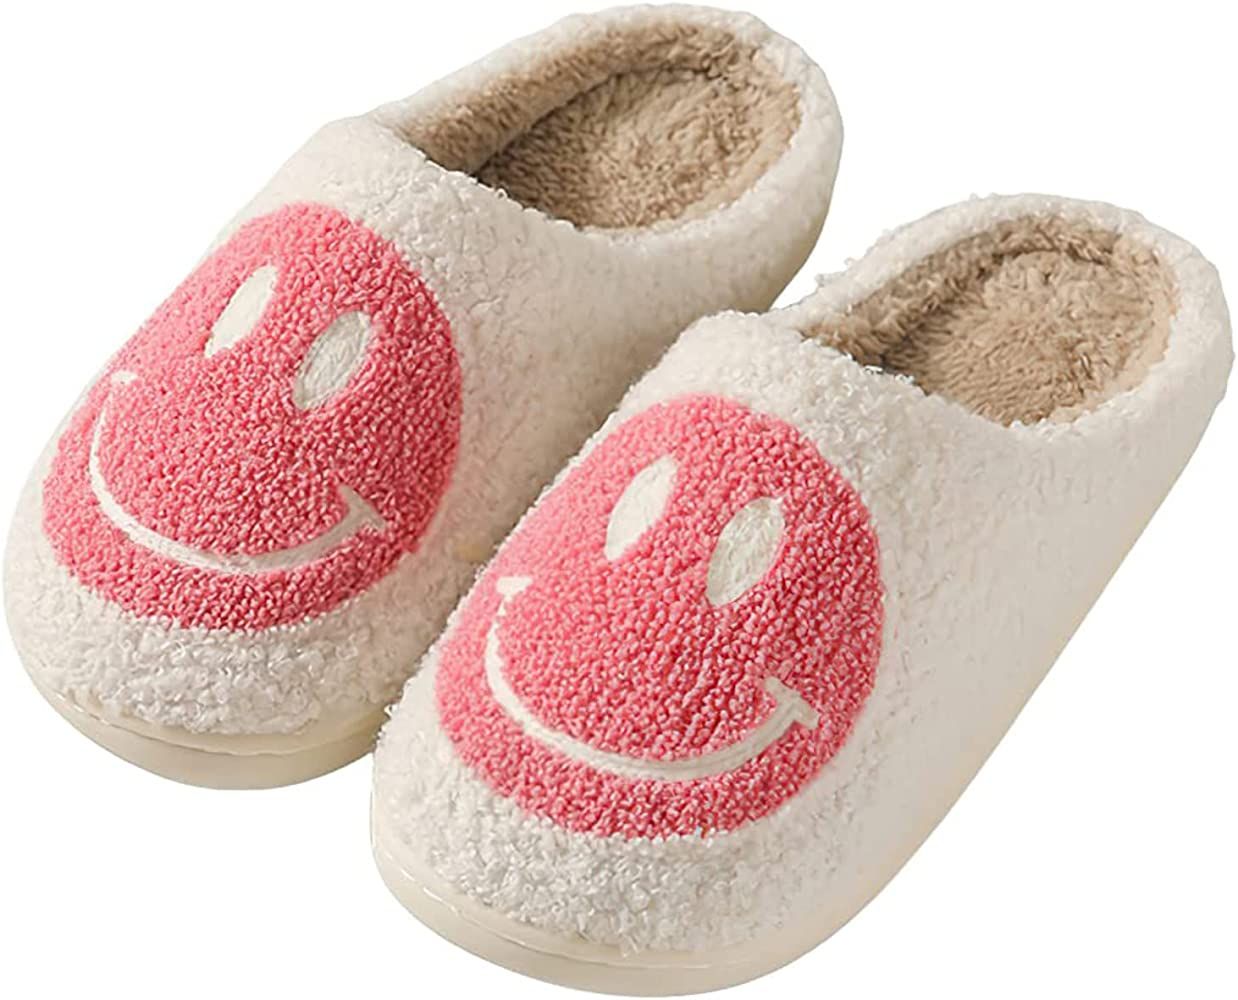 Smiley Face Slippers For Women And Men Fuzzy Fluffy Slippers Warm Cozy House Slippers Slip-on Indoor | Amazon (US)